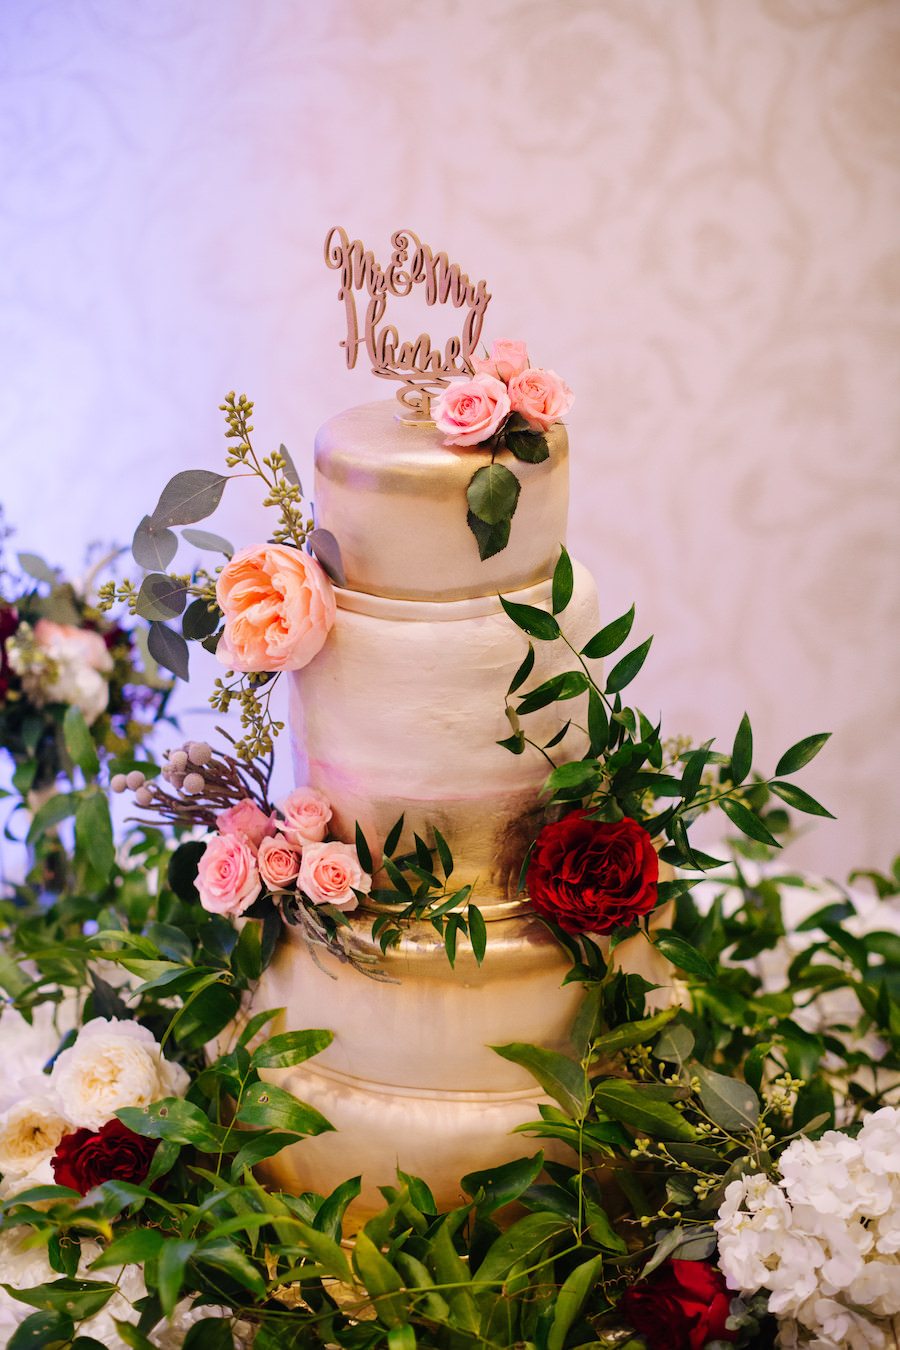 Five Tier Gold and White Wedding Cake with Blush Pink, Peach, Red, and White Roses with Greenery and Gold Mr and Mrs Cake Topper